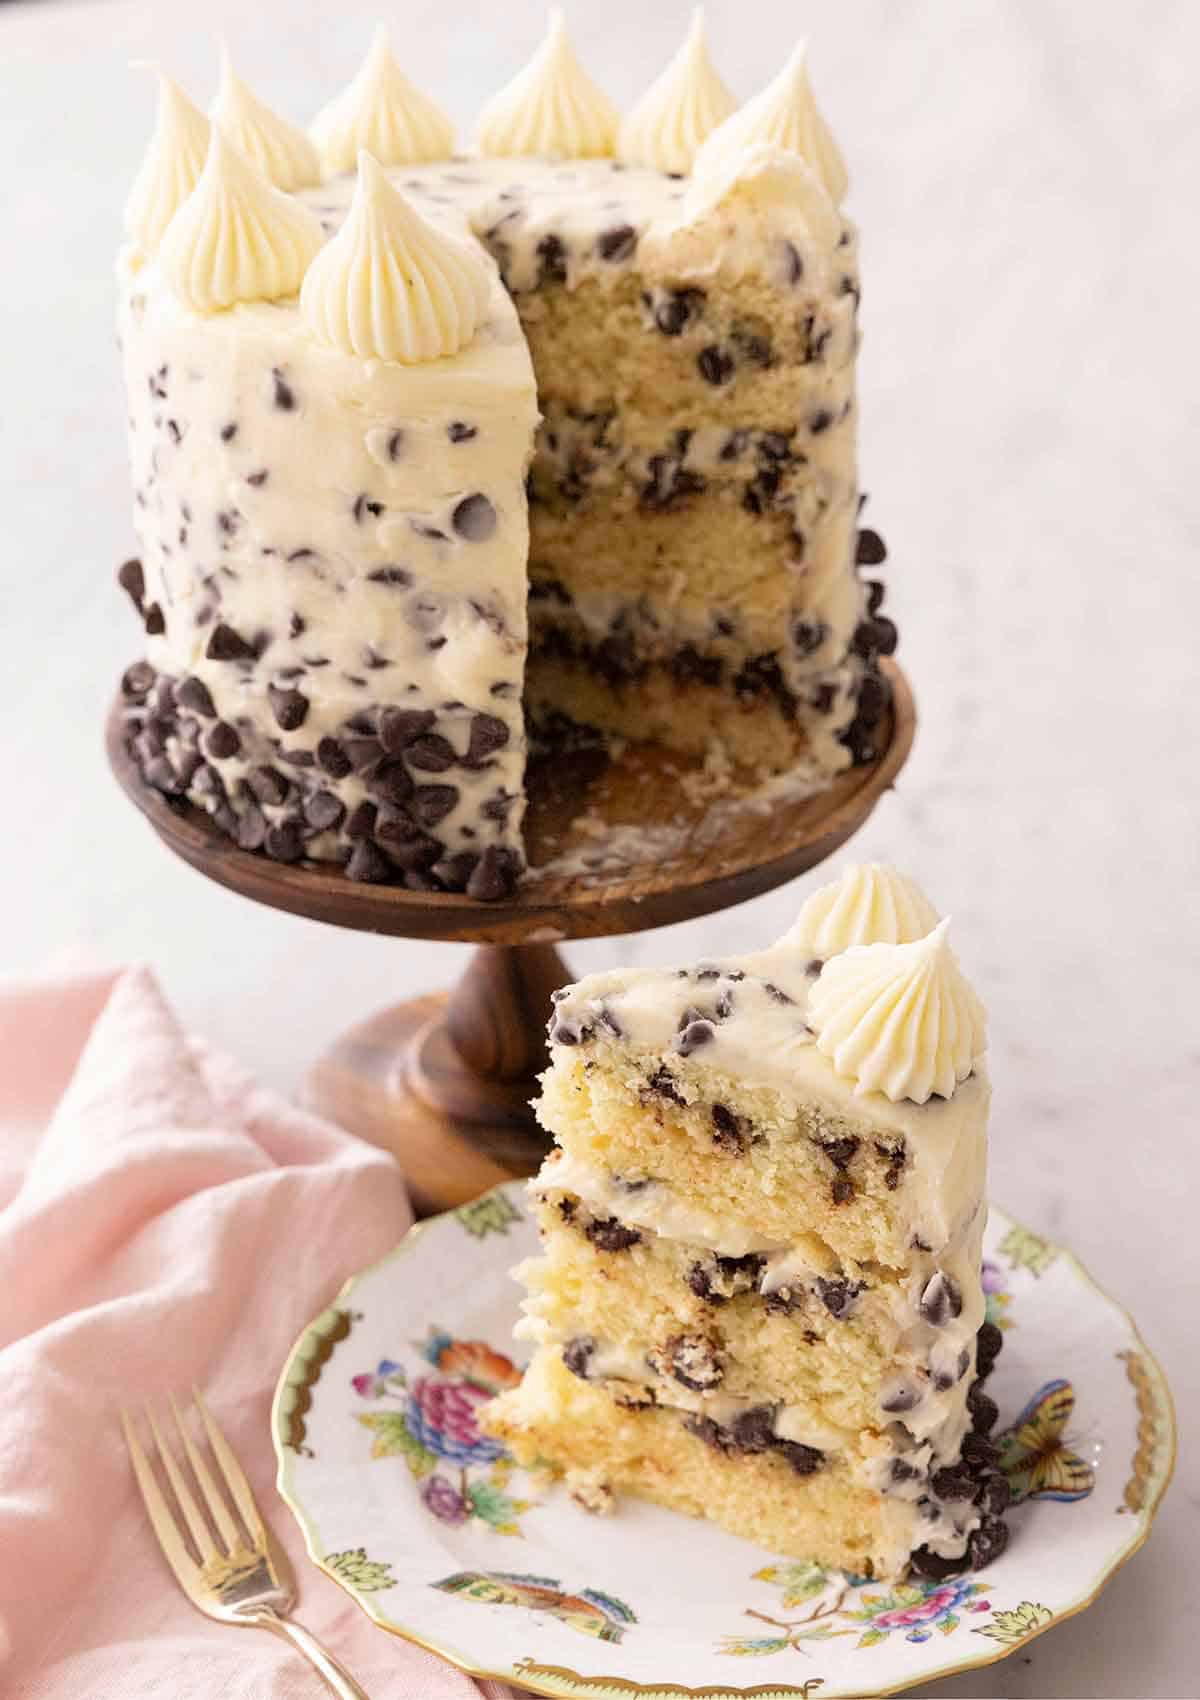 A chocolate chip cake on a cake stand with a slice cut and placed on a plate.